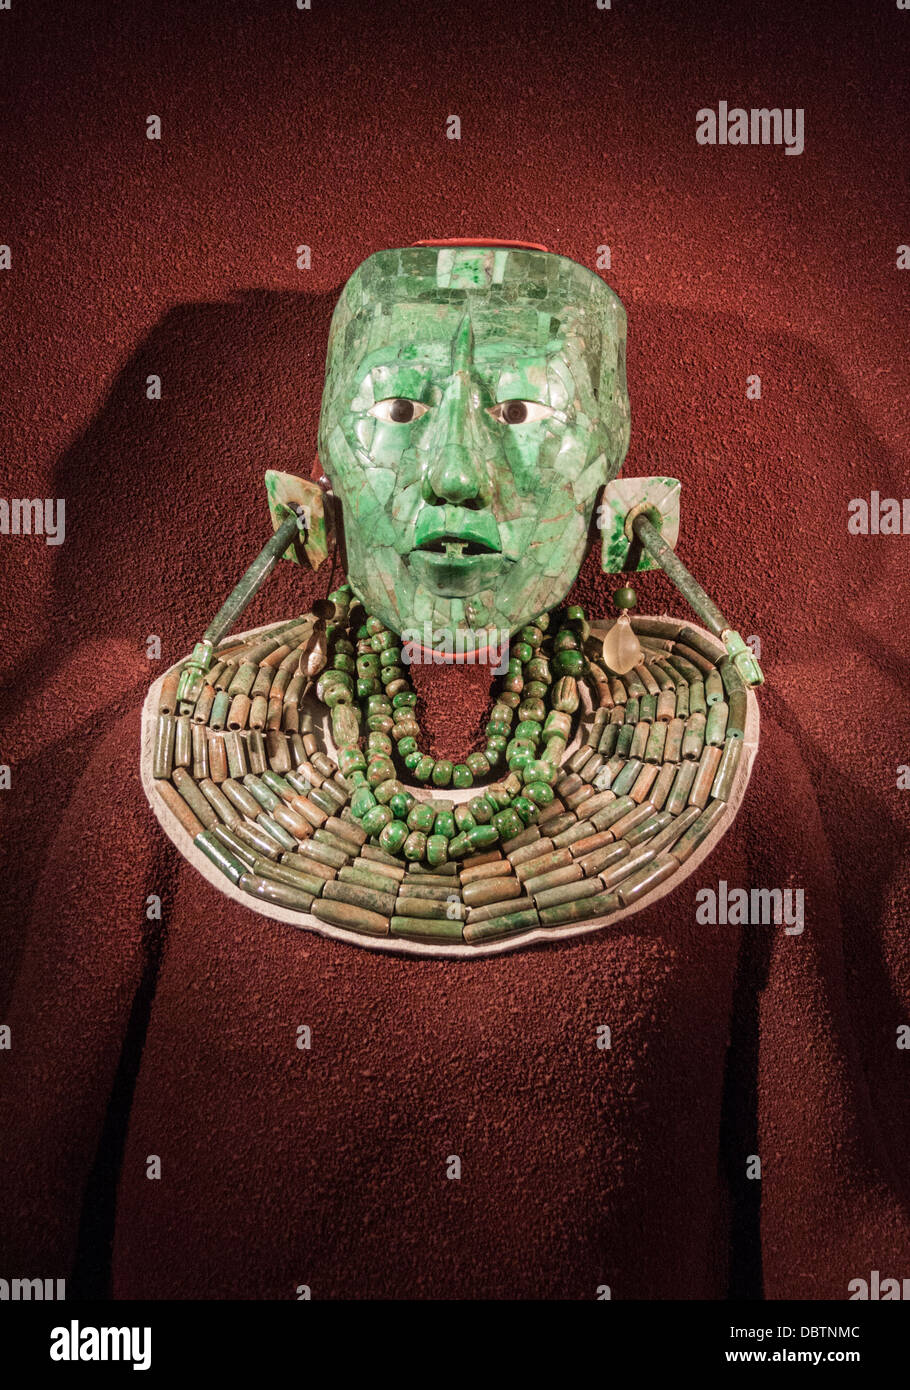 Aztec and Mayan Culture Stock Photo